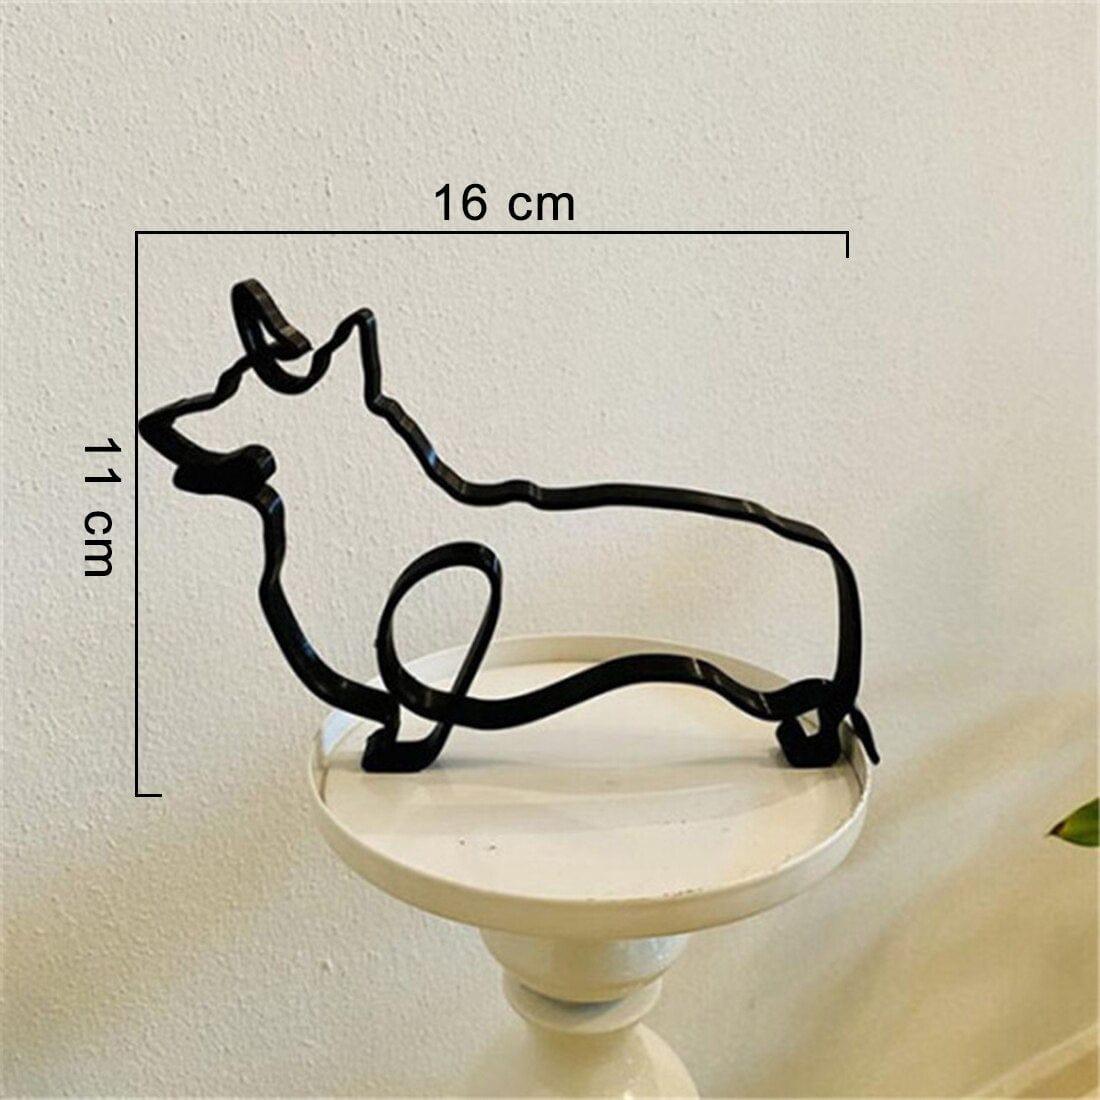 Shop 0 A Dog Art Sculpture Simple Metal Dog Abstract Art Sculpture for Home Party Office Desktop Decoration Cute Pet Dog Cats Gifts Mademoiselle Home Decor